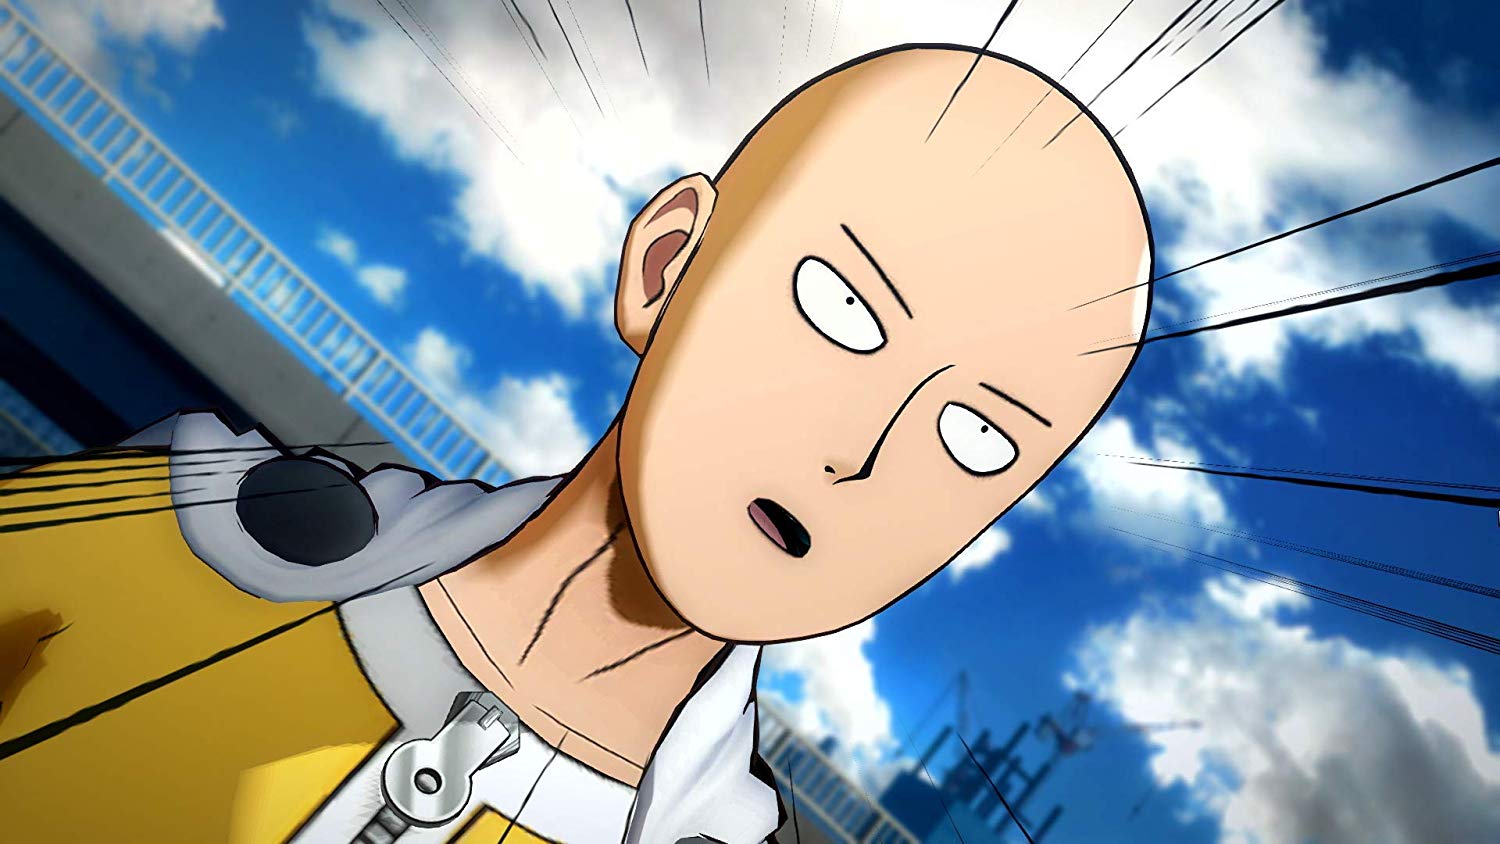 XBOX ONE One Punch Man -  A Hero Nobody Knows 